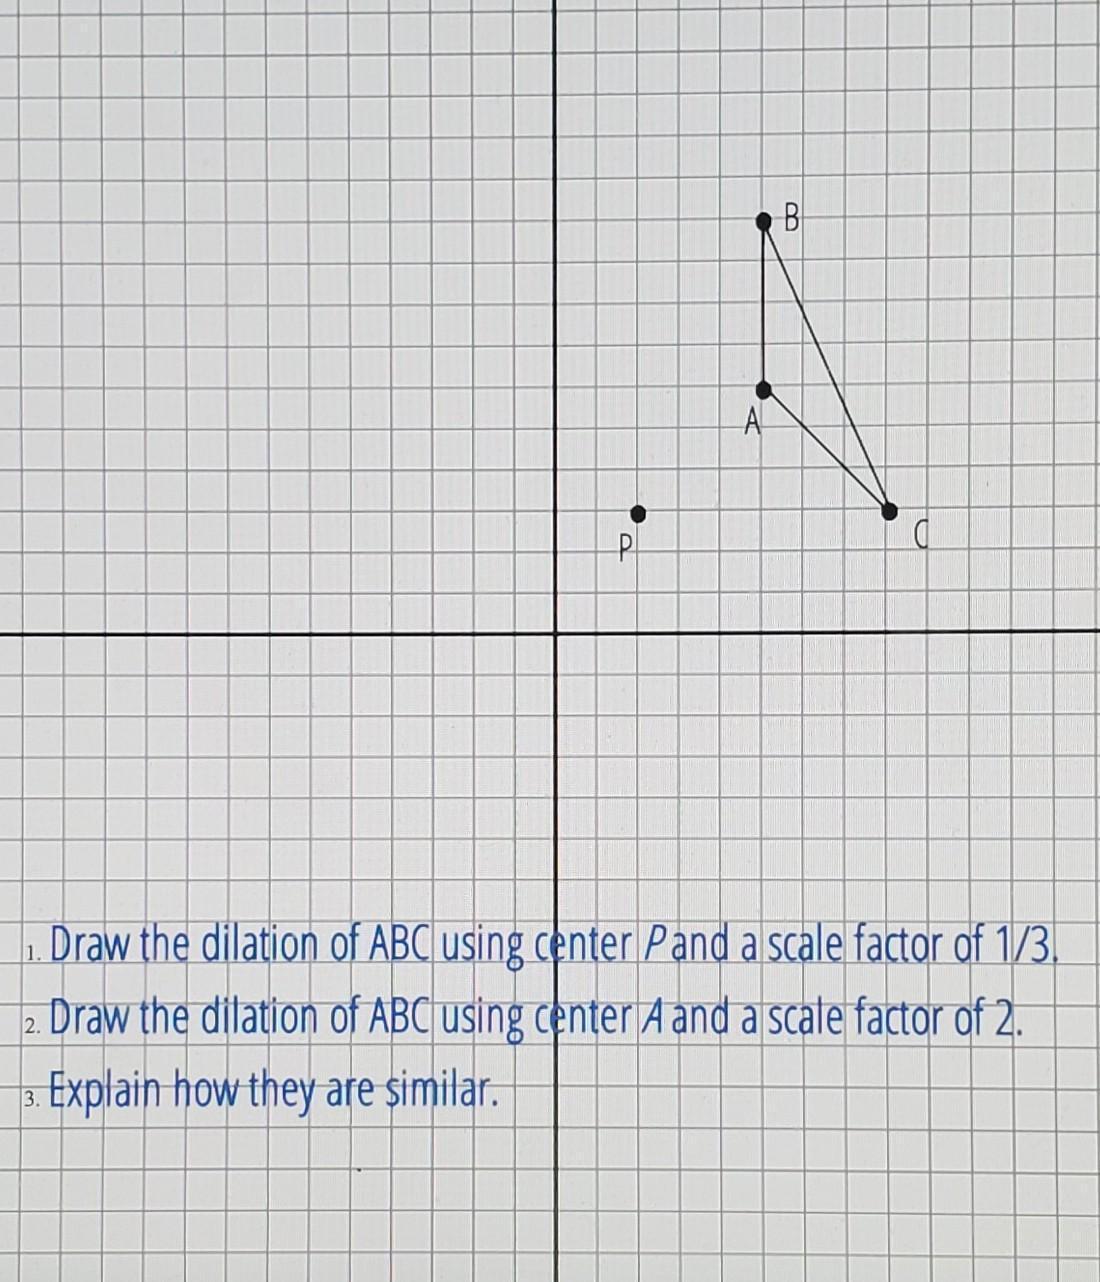 Draw The Dilation Of ABC Using Center P And A Scale Factor Of 1/3. Draw The Dilation Of ABC Using Center